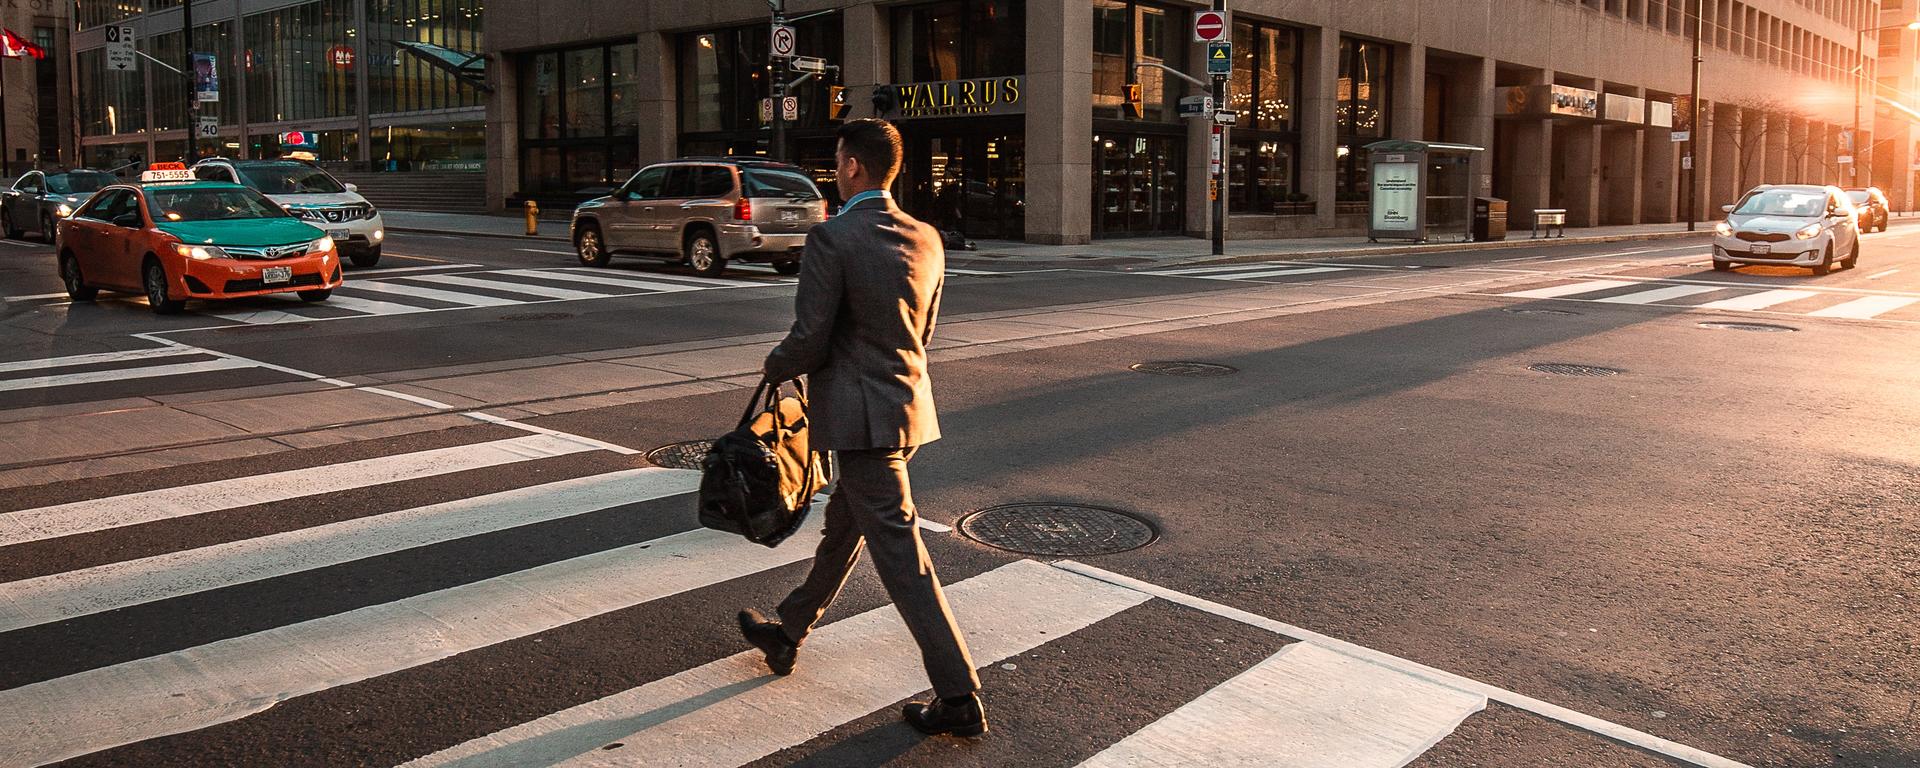 A person in a suit walks through a crosswalk on a sunny morning in a downtown city.